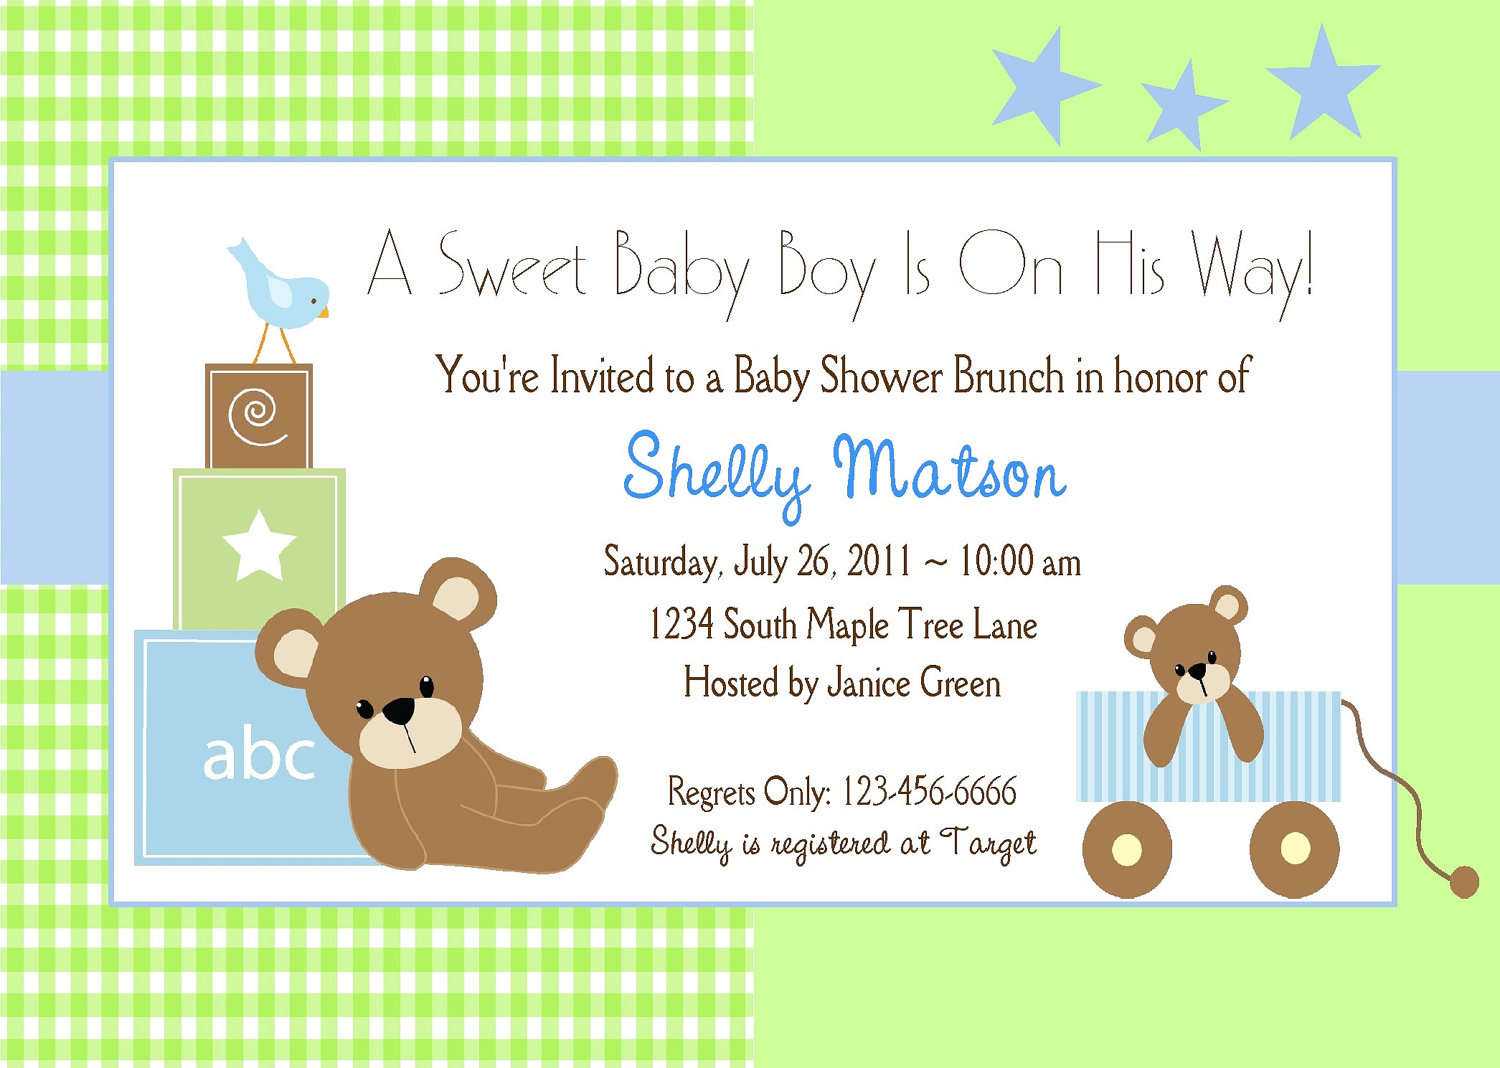 Making Your Own Funny Baby Shower Invitations | Free Within Free Baby Shower Invitation Templates Microsoft Word